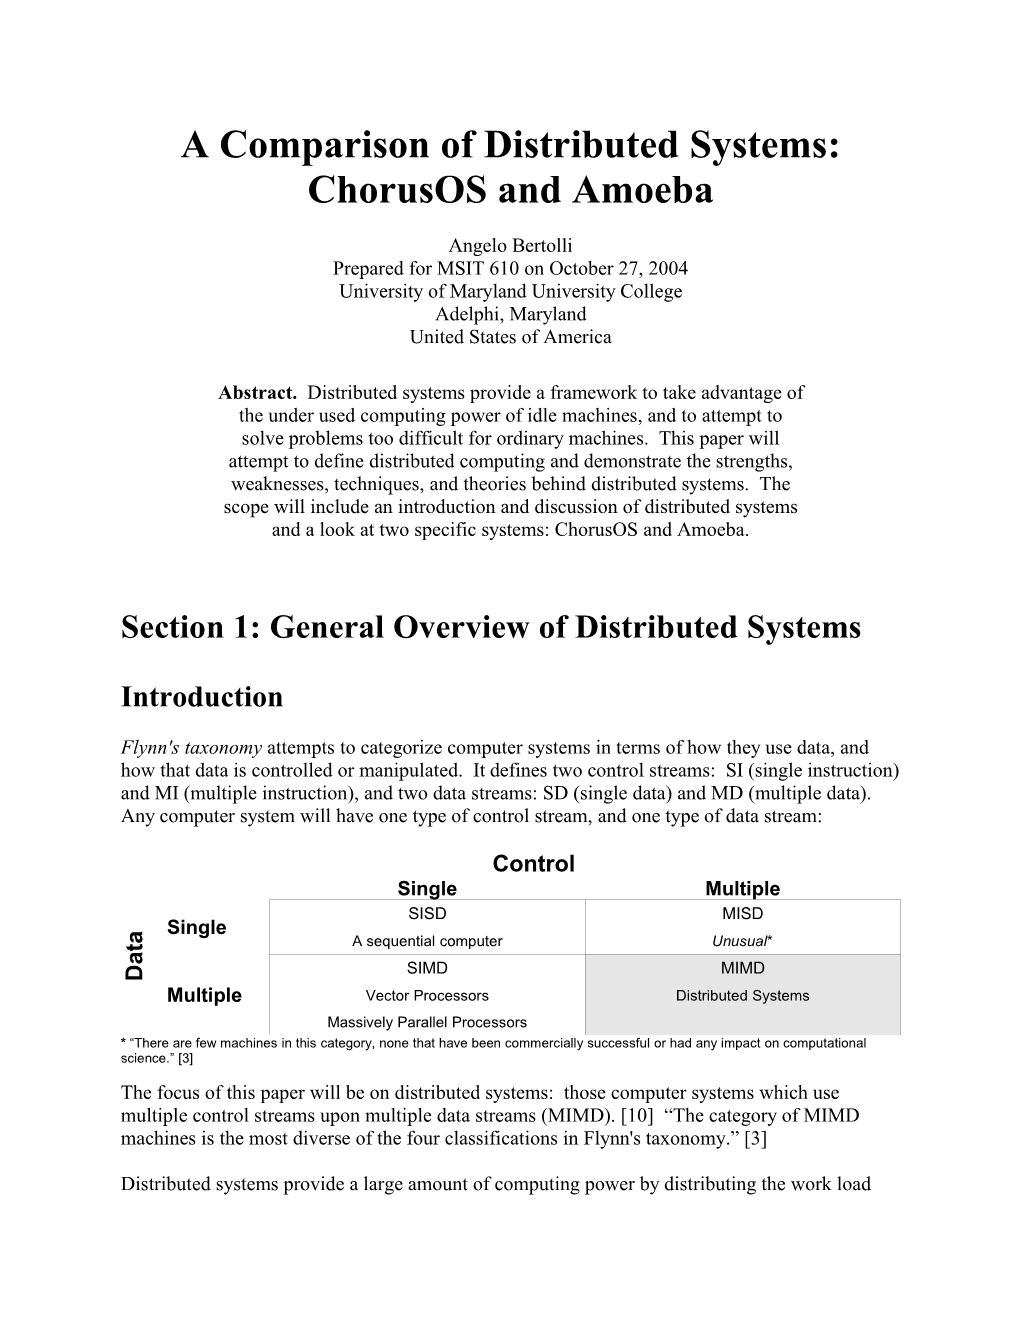 A Comparison of Distributed Systems: Chorusos and Amoeba